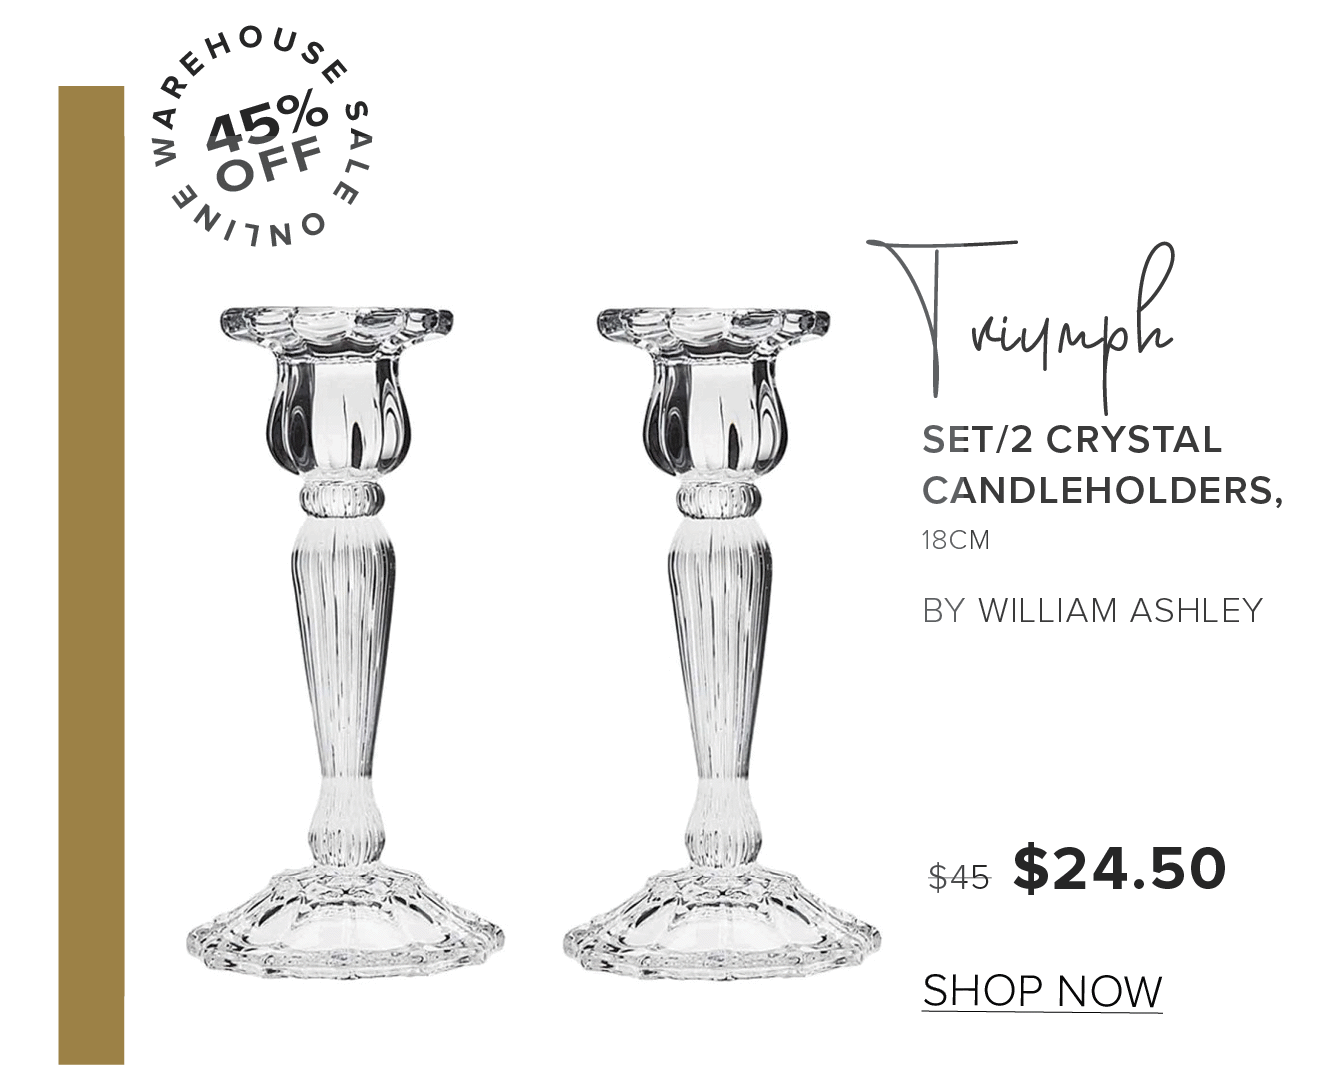 Tonf SET2 CRYSTAL CANDLEHOLDERS, 18CM BY WILLIAM ASHLEY 545 $24.50 SHOP NOW 